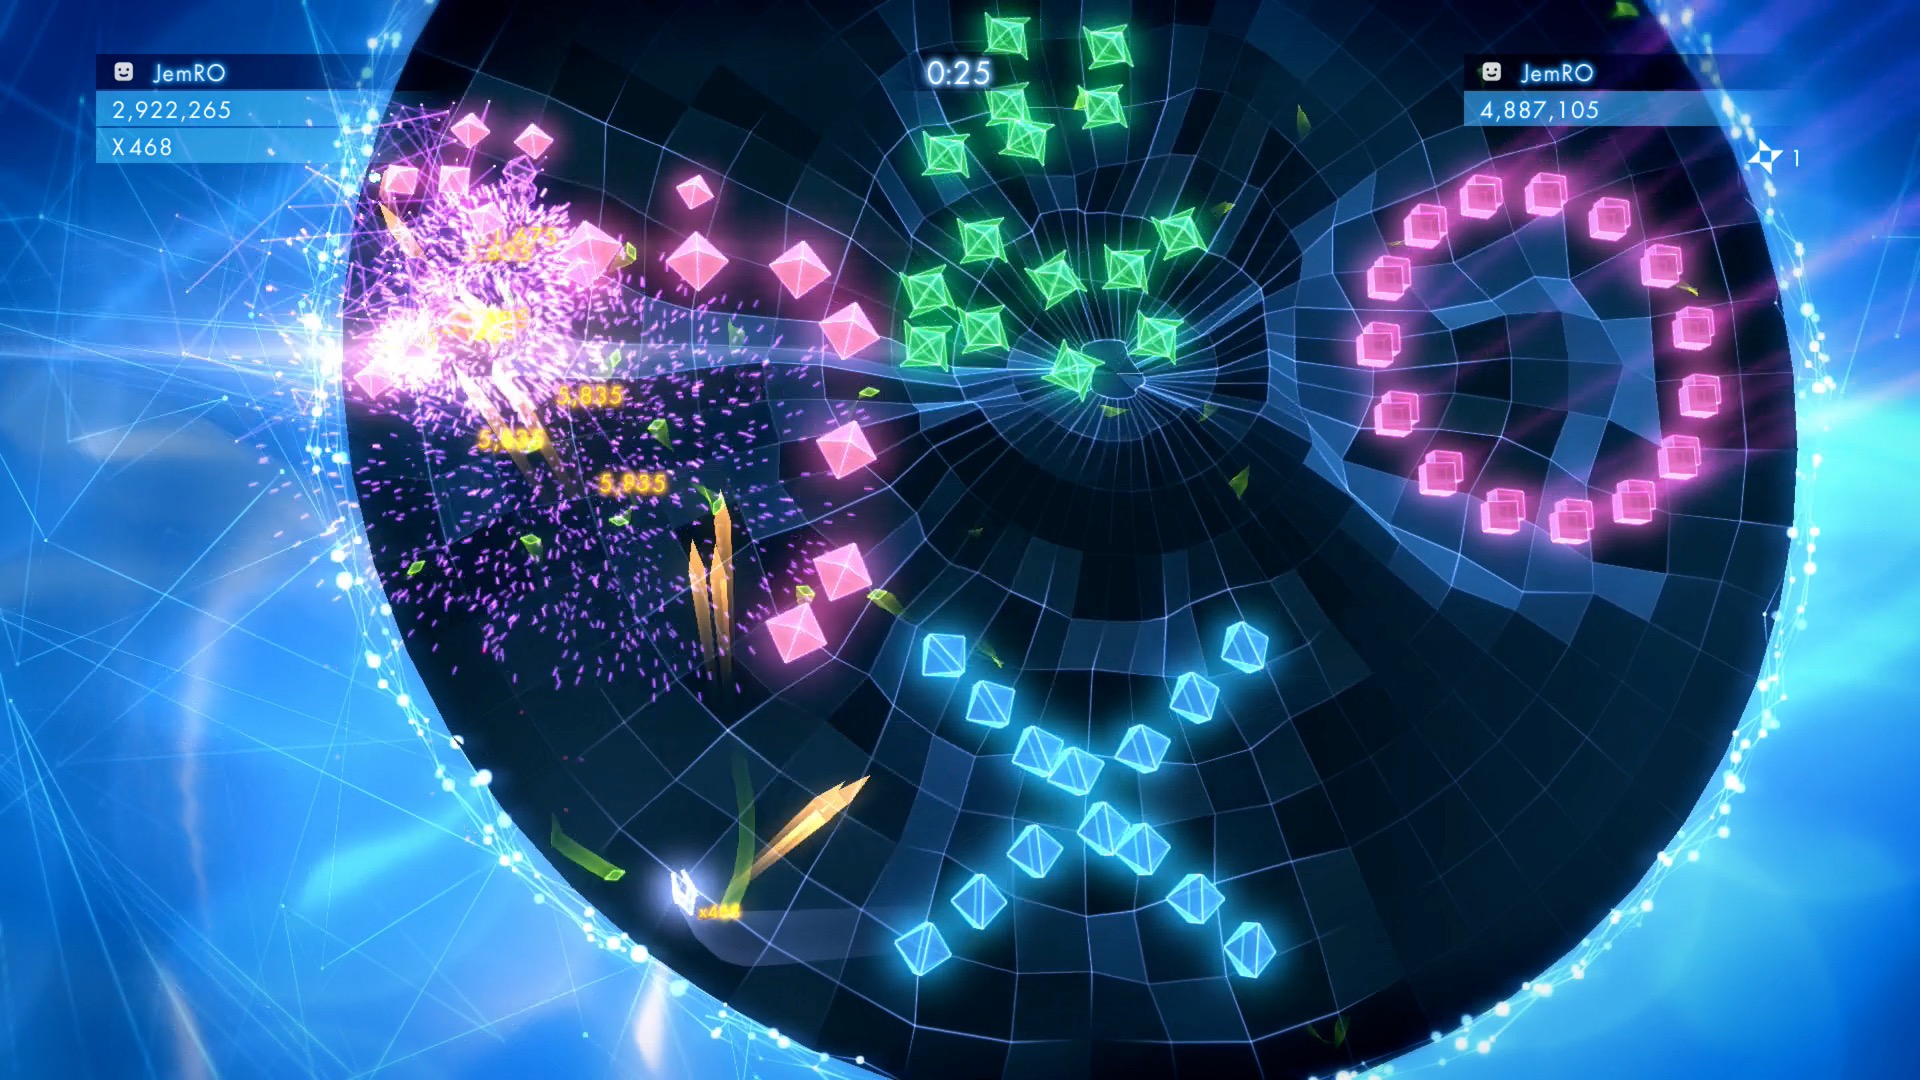 Geometry Wars 3: Dimensions Evolved #19